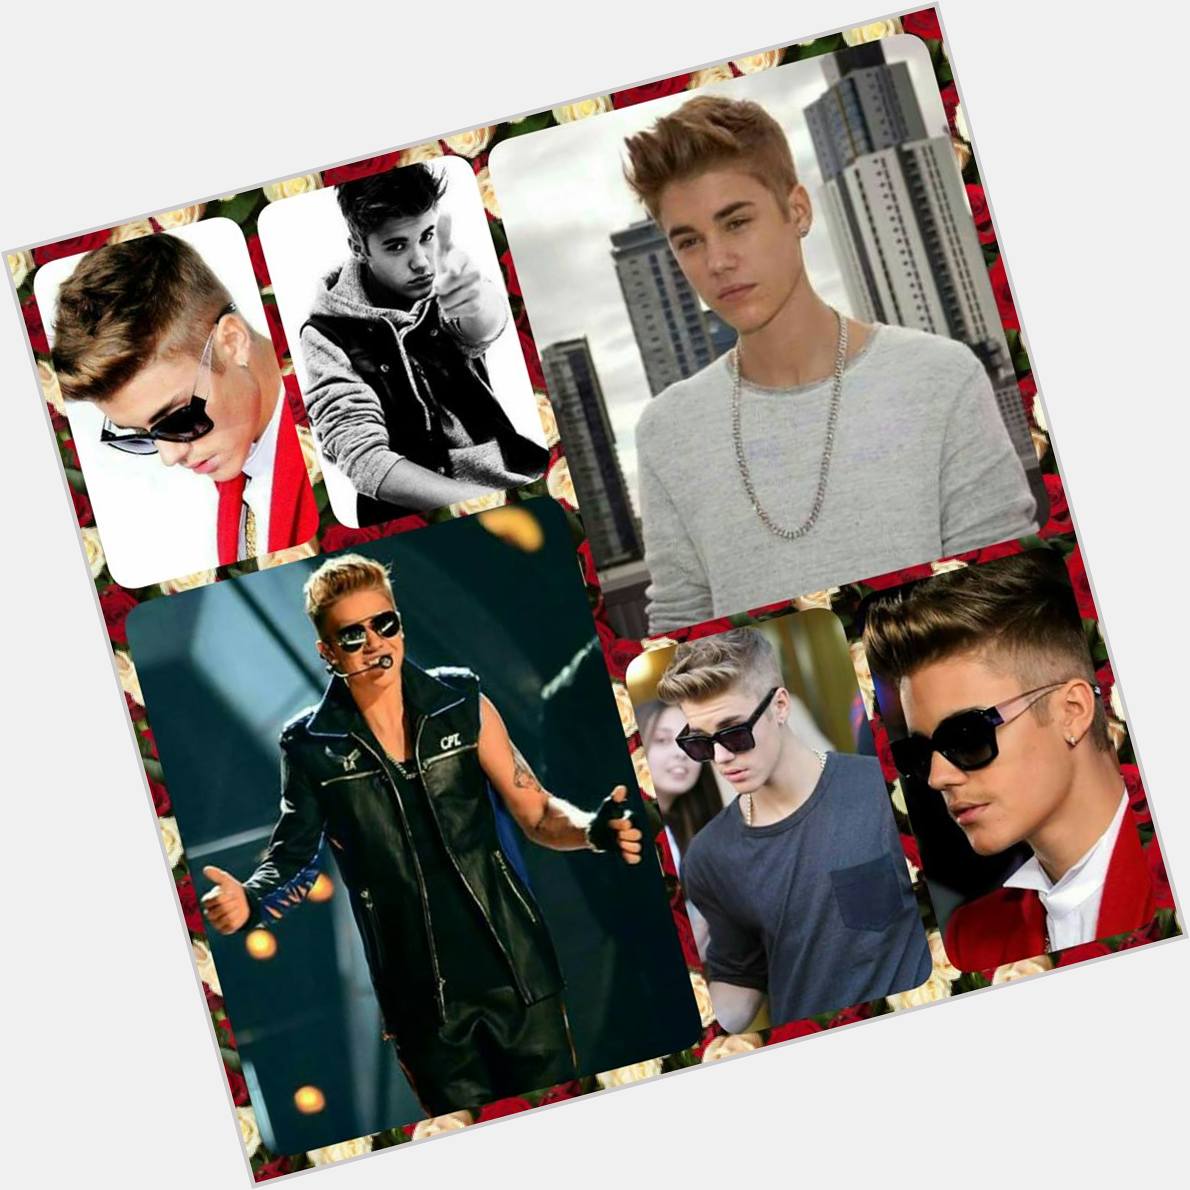 Happy birthday Justin Bieber!!!! hope you have and enjoyable one and may god always bless you!!!! 